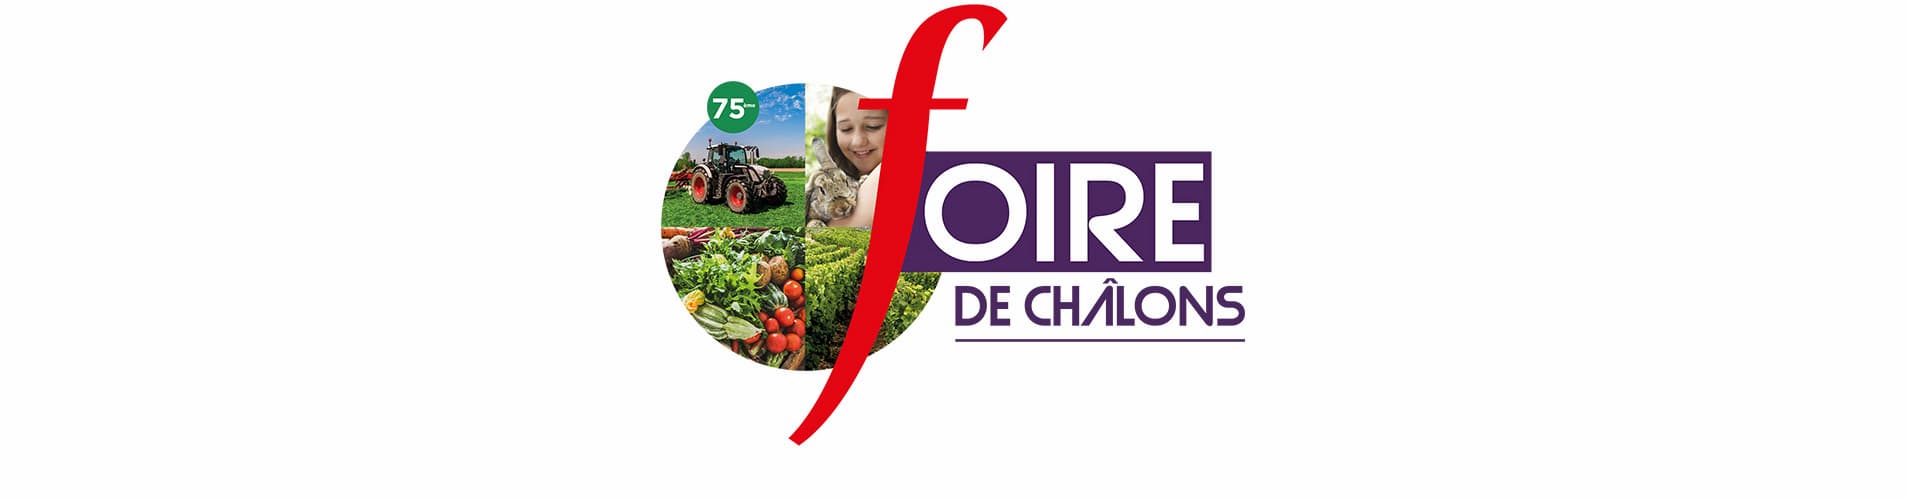  foire chalons creditagricole